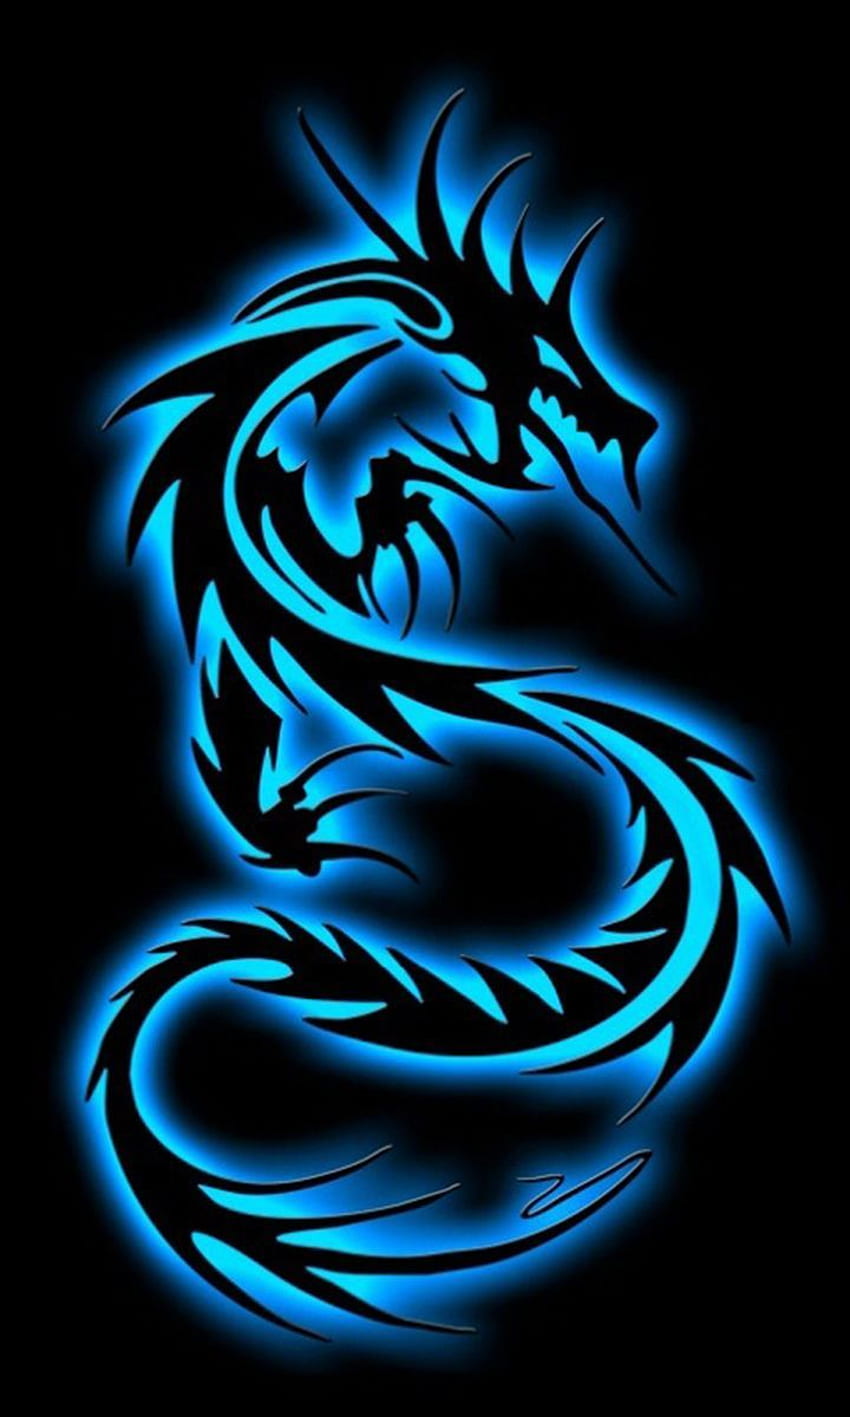 1000 Tribal Dragon Tattoo Stock Photos Pictures  RoyaltyFree Images   iStock